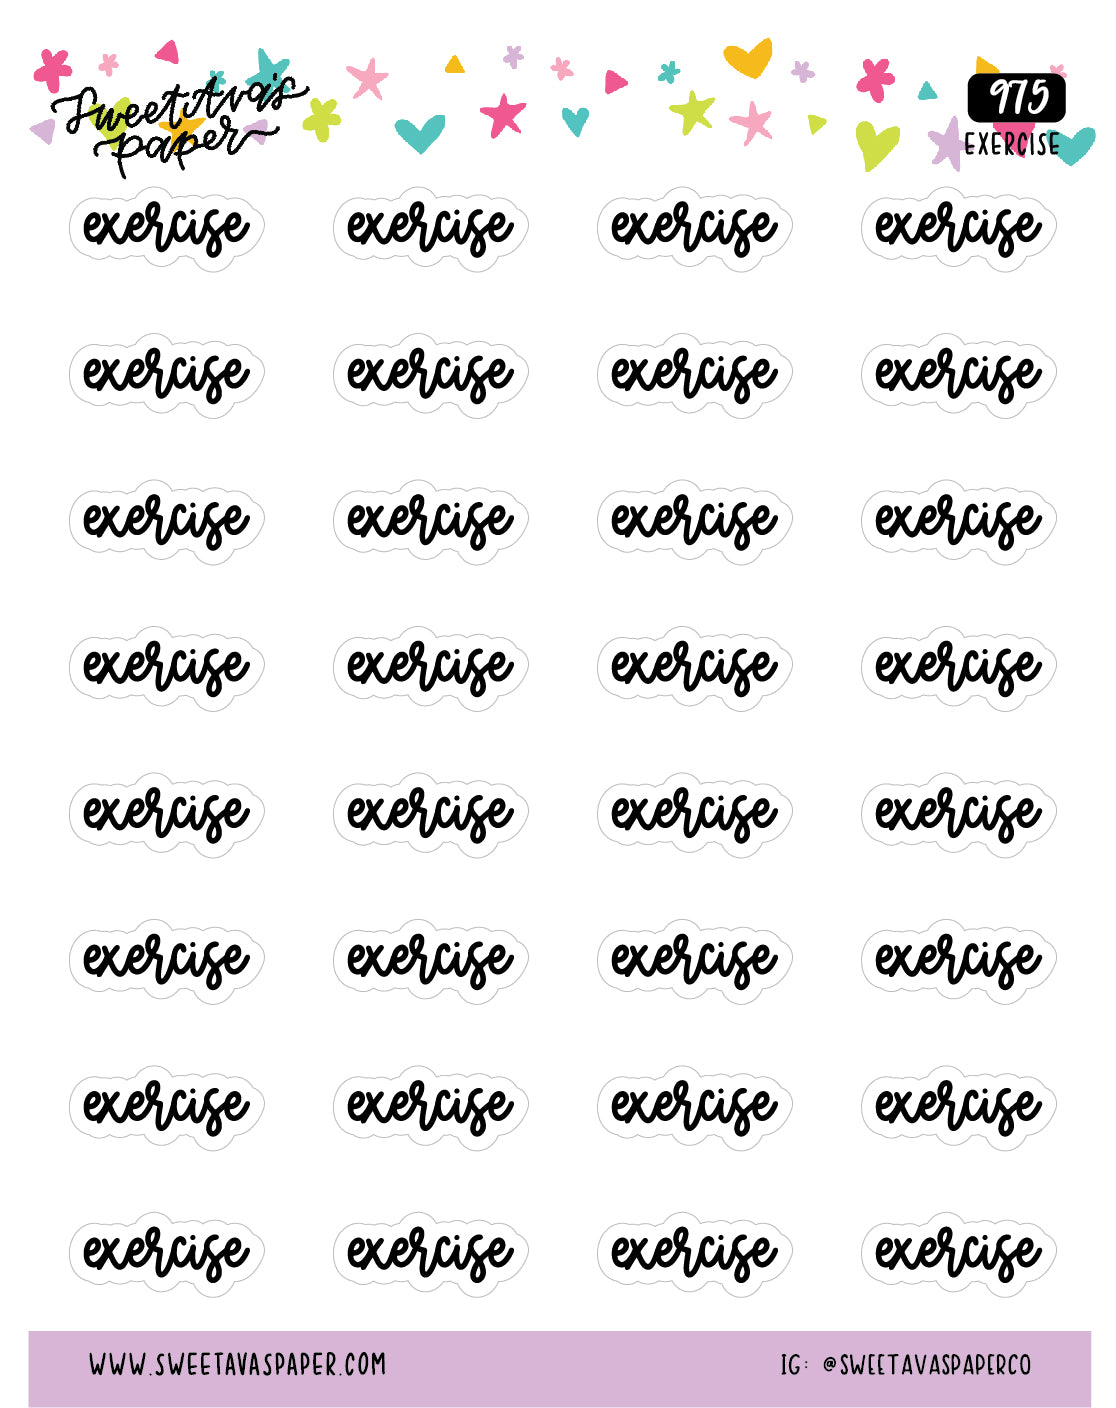 Exercise Planner Stickers - Script / Text - [975]